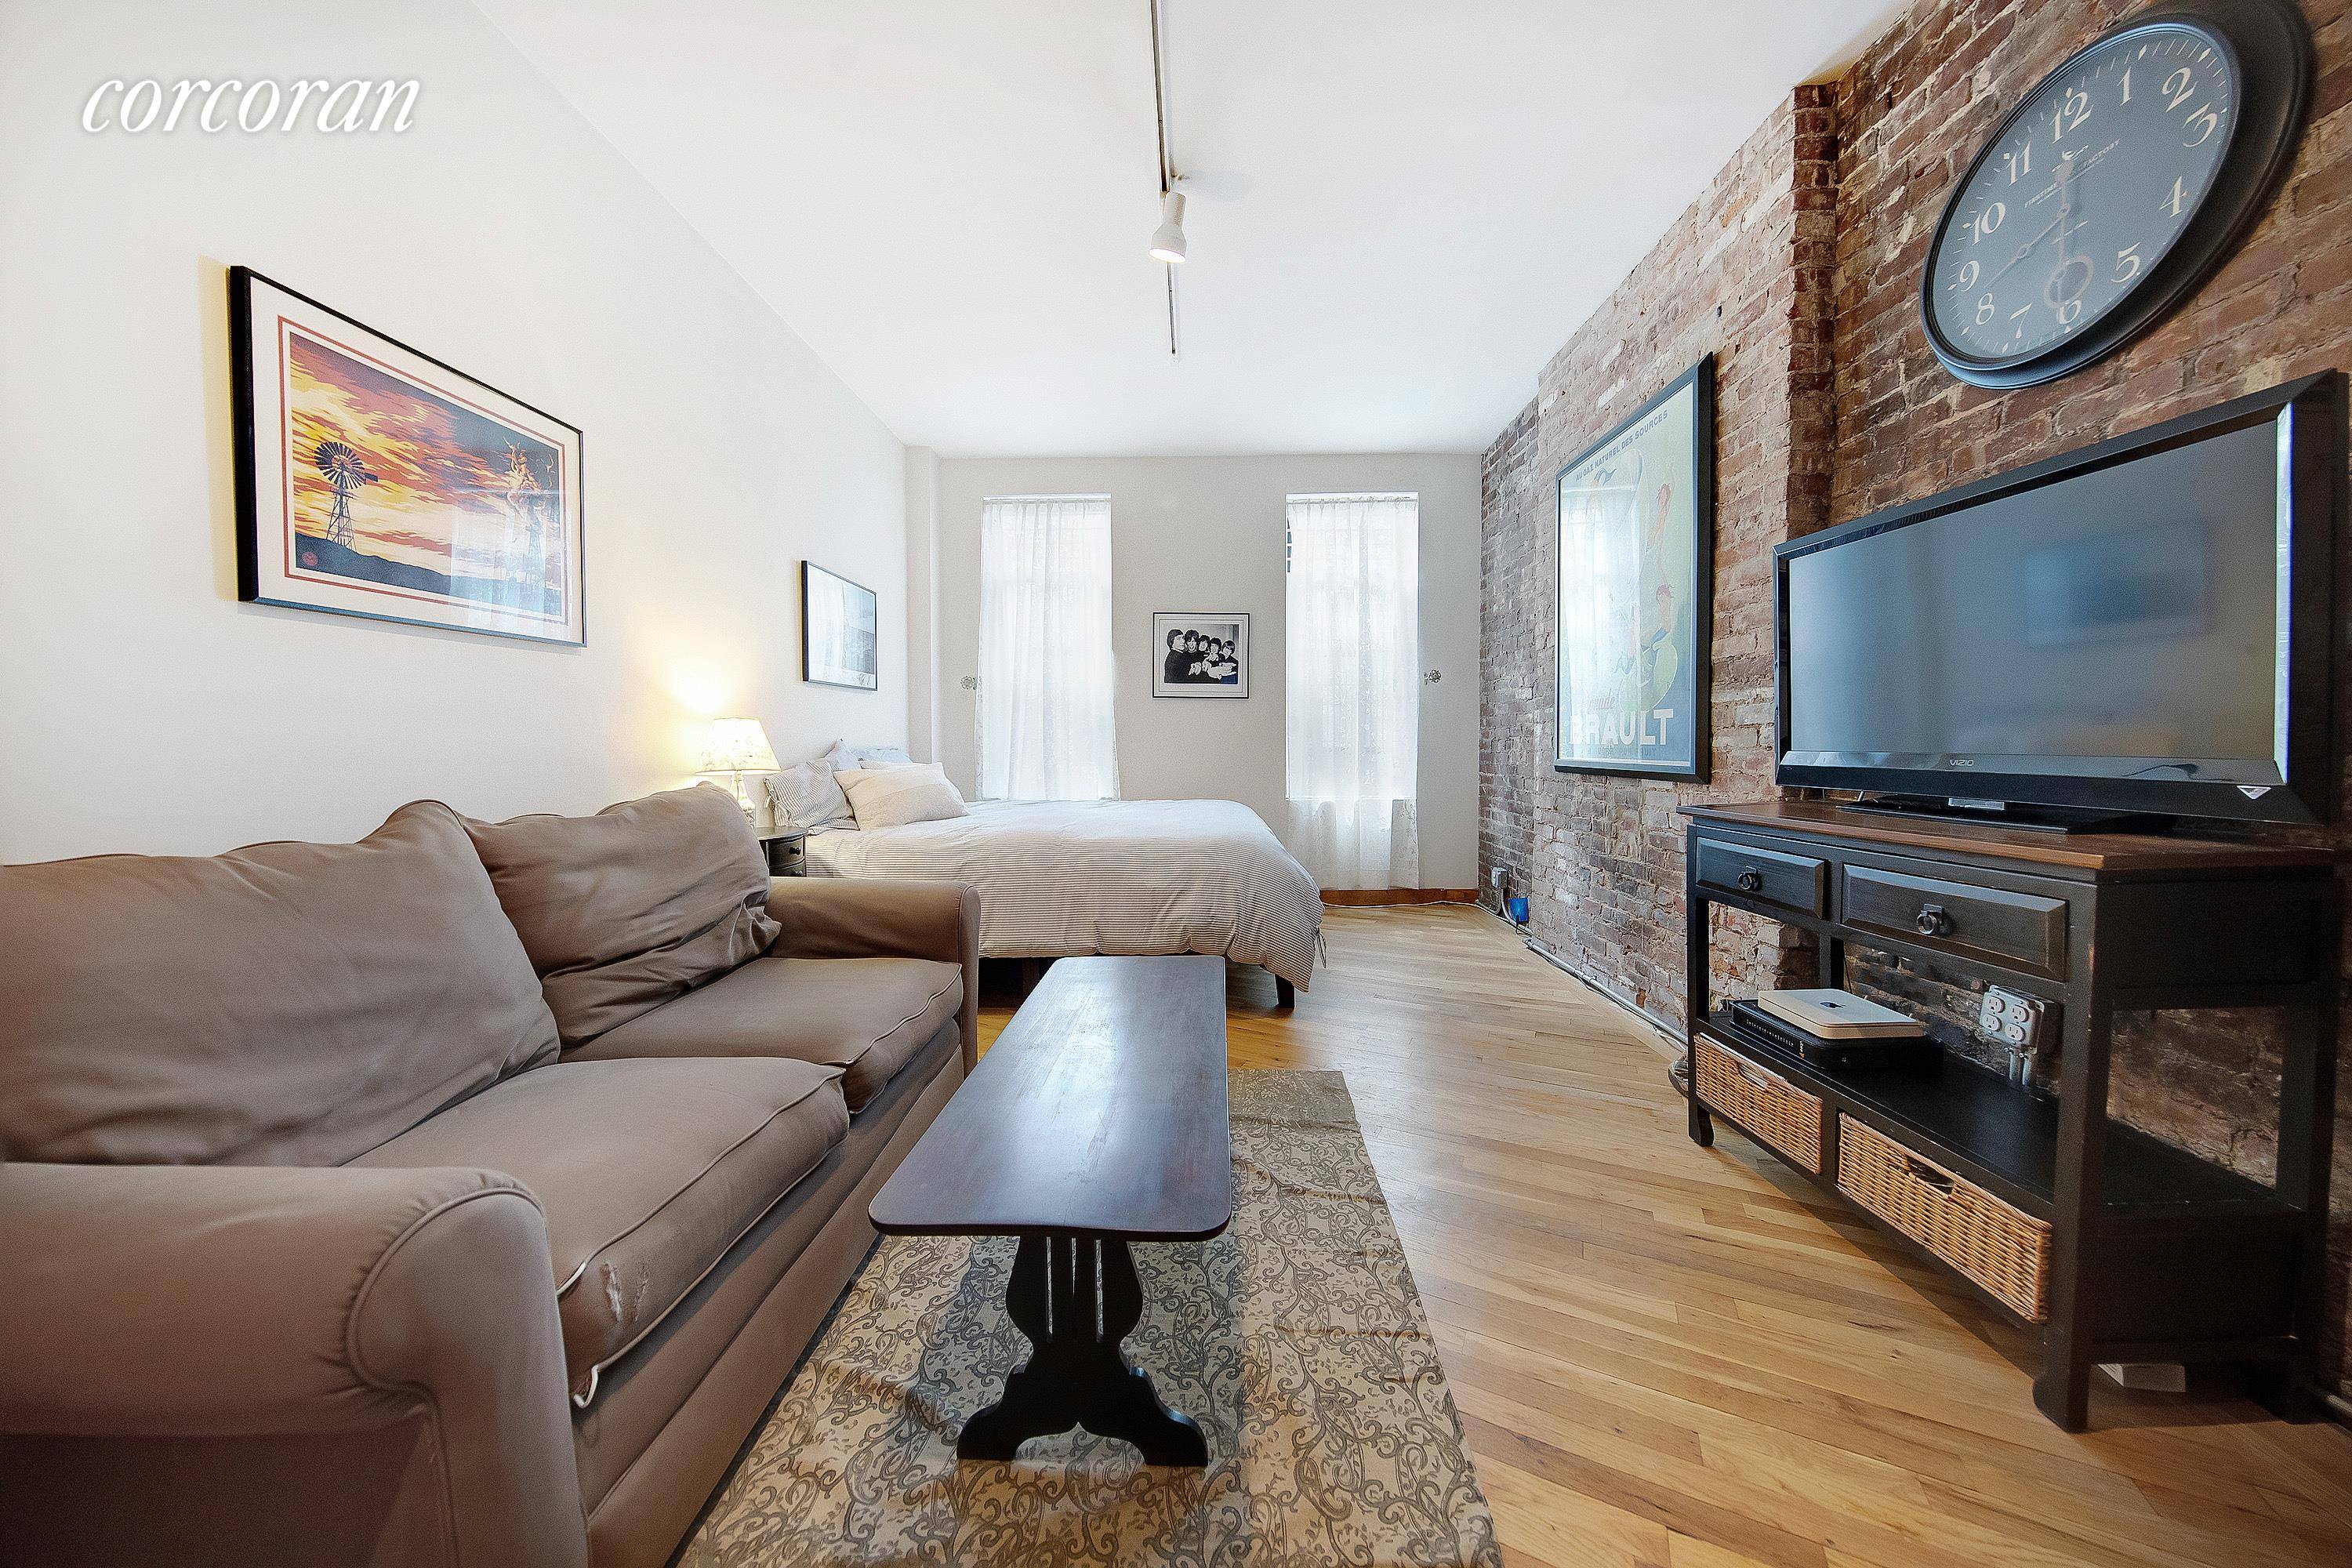 Welcome to 71 Sullivan Street 3C, a newly renovated studio on a beautiful tree lined street in SoHo, one of Manhattans most sought after and vibrant neighborhoods.